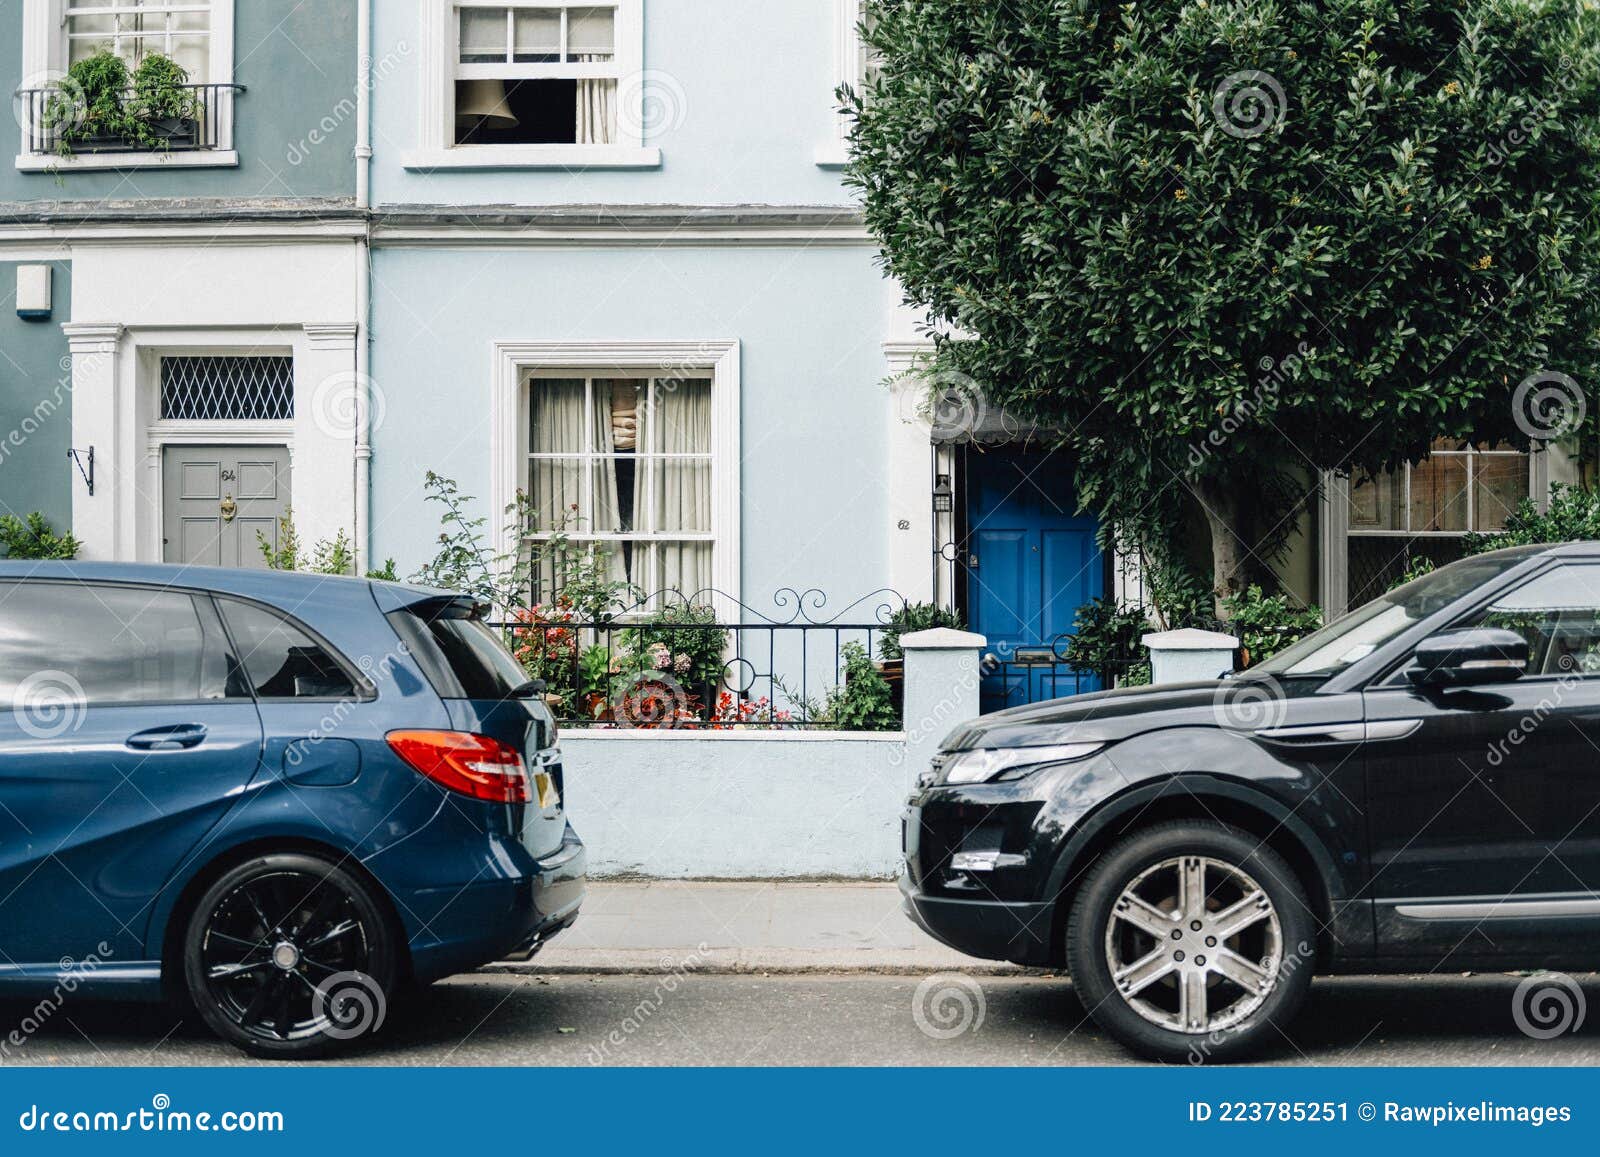 two parked cars in front of an apartment entrance